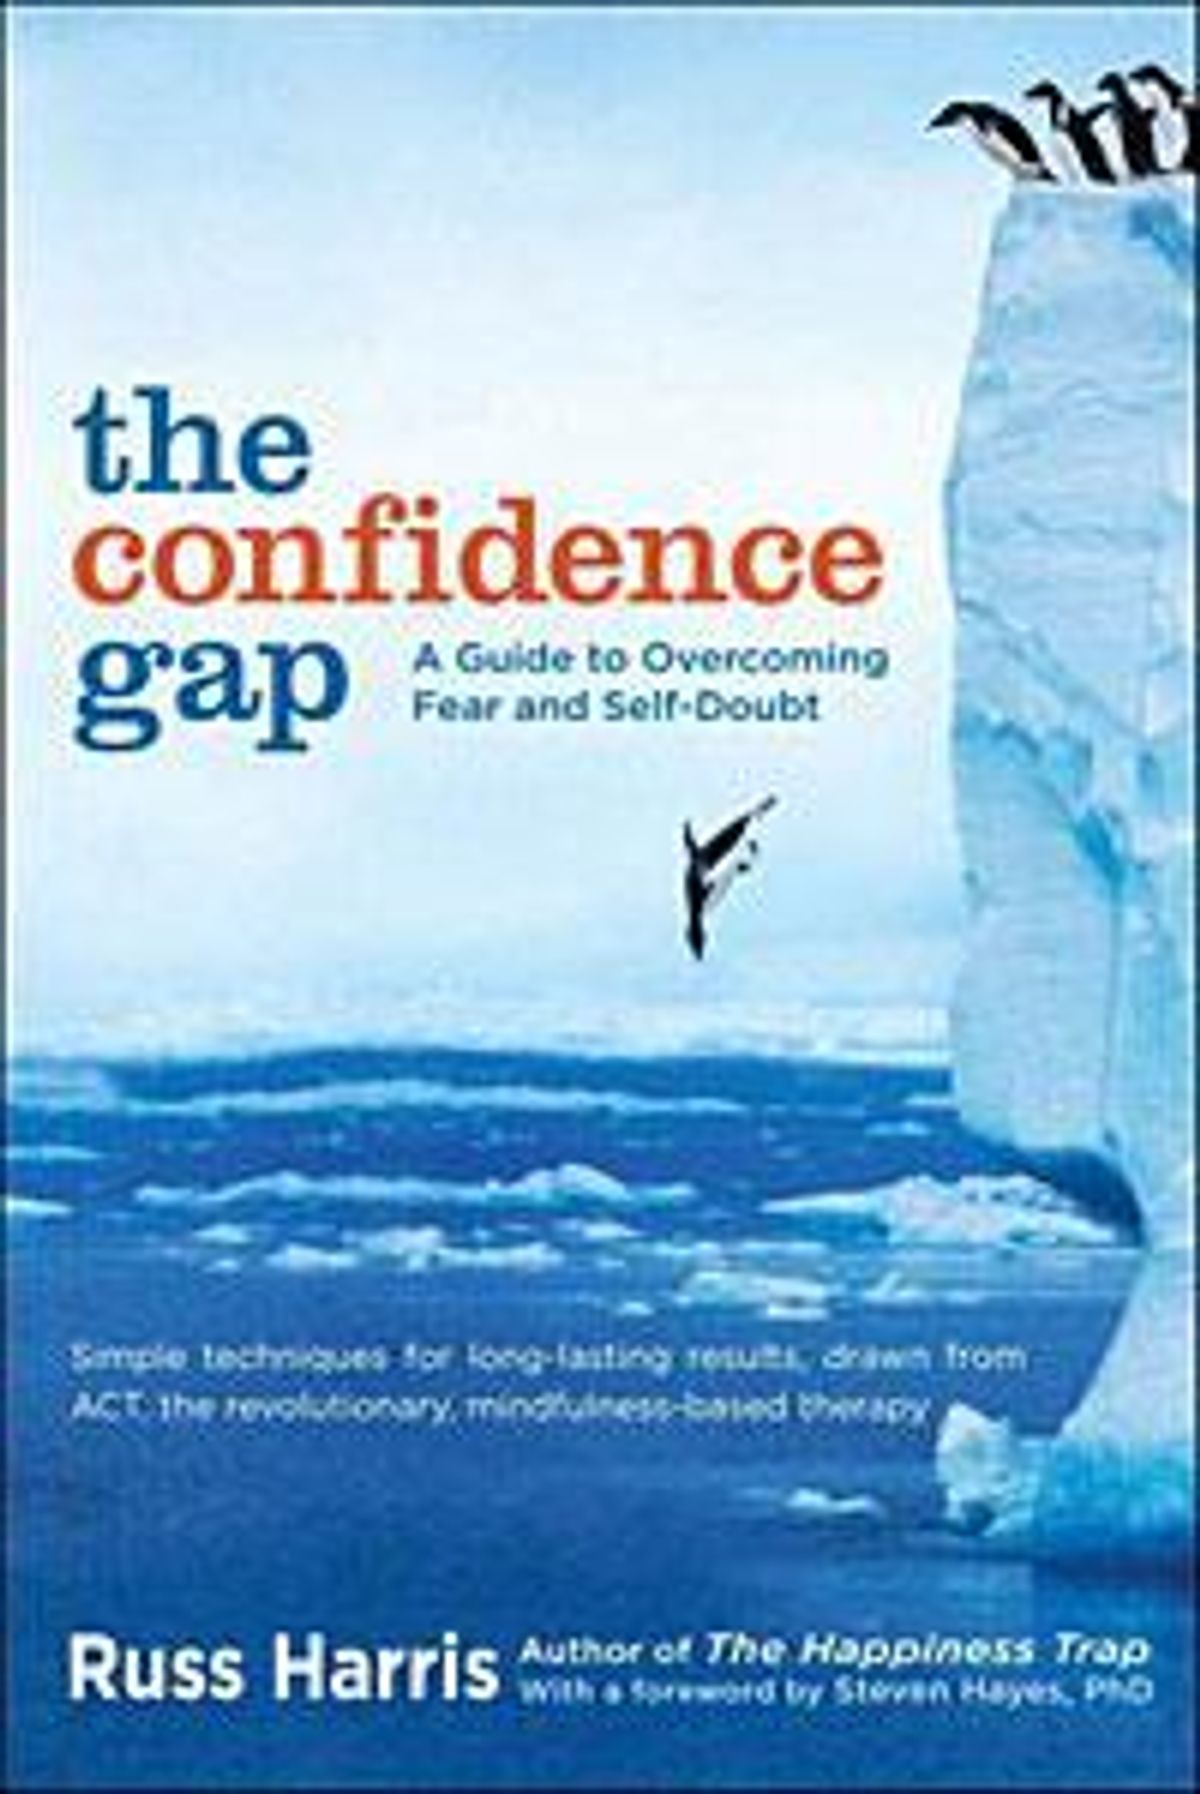 The-confidence-gapx200